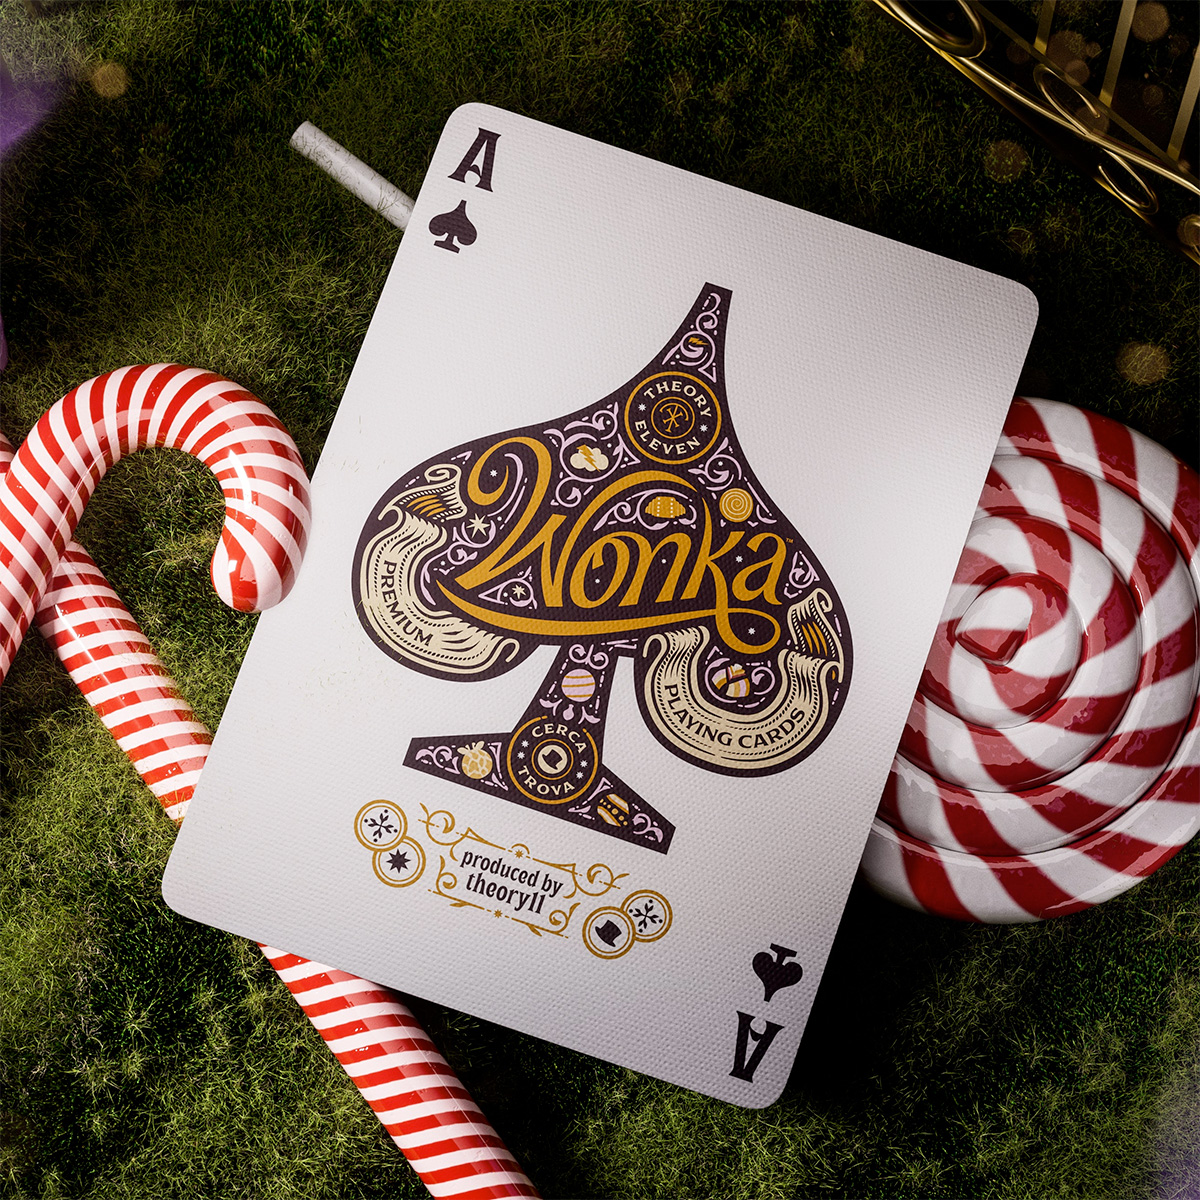 Wonka Movie Deluxe Deck with Premium Cards from Theory11